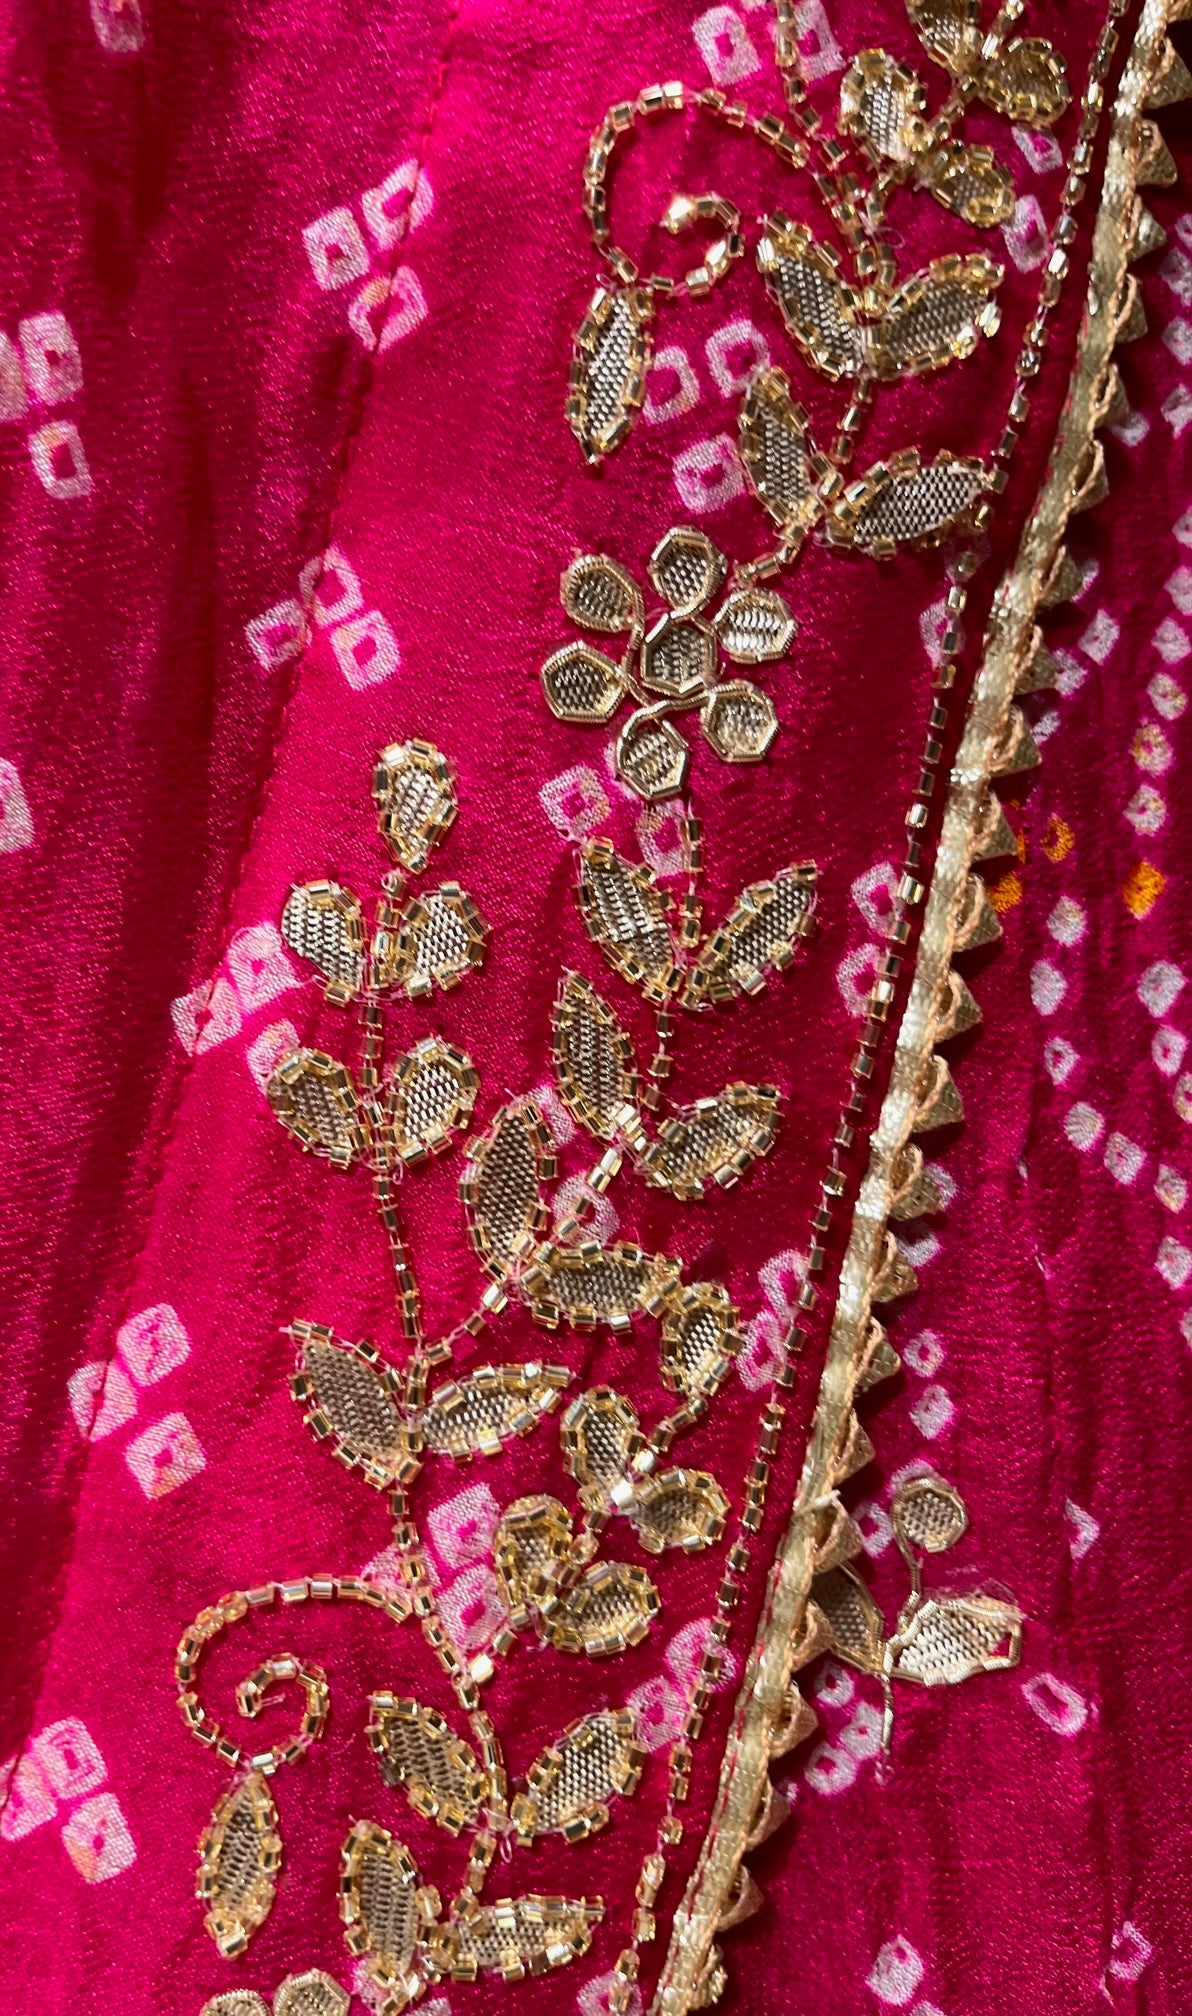 Showcased here is a bandhani printed lehenga with gota-patti motifs accents  and printed ethnic delights. Having a vibrantly contrasting… | Instagram